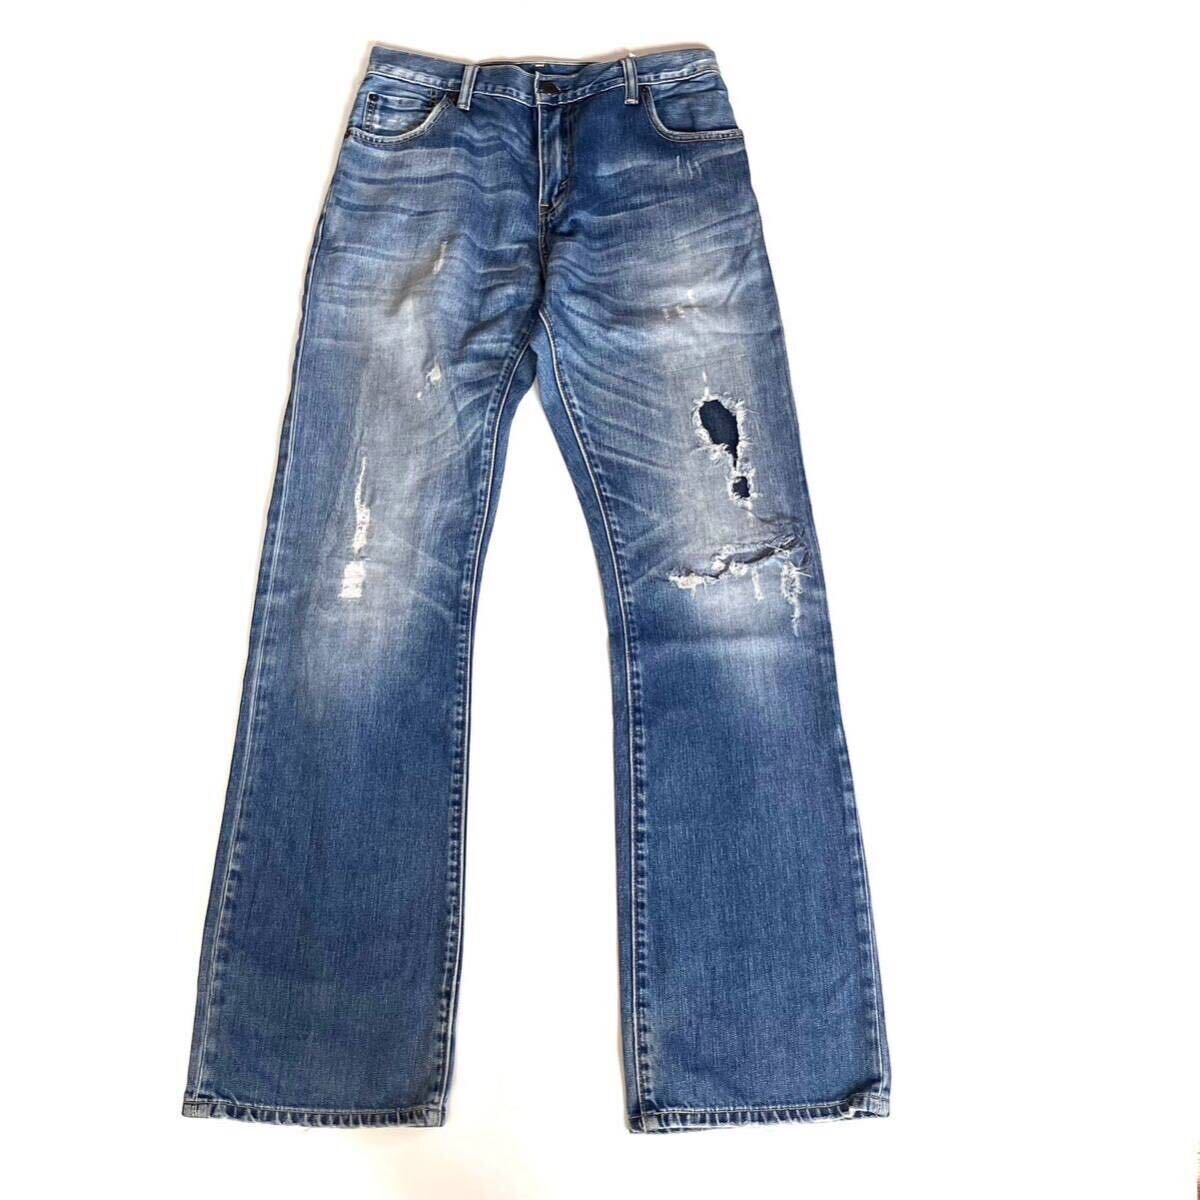 ★☆W30inch-76.20cm☆★Levi's517 EOP→End of Production★☆ファンキーダメージ！☆★_画像4